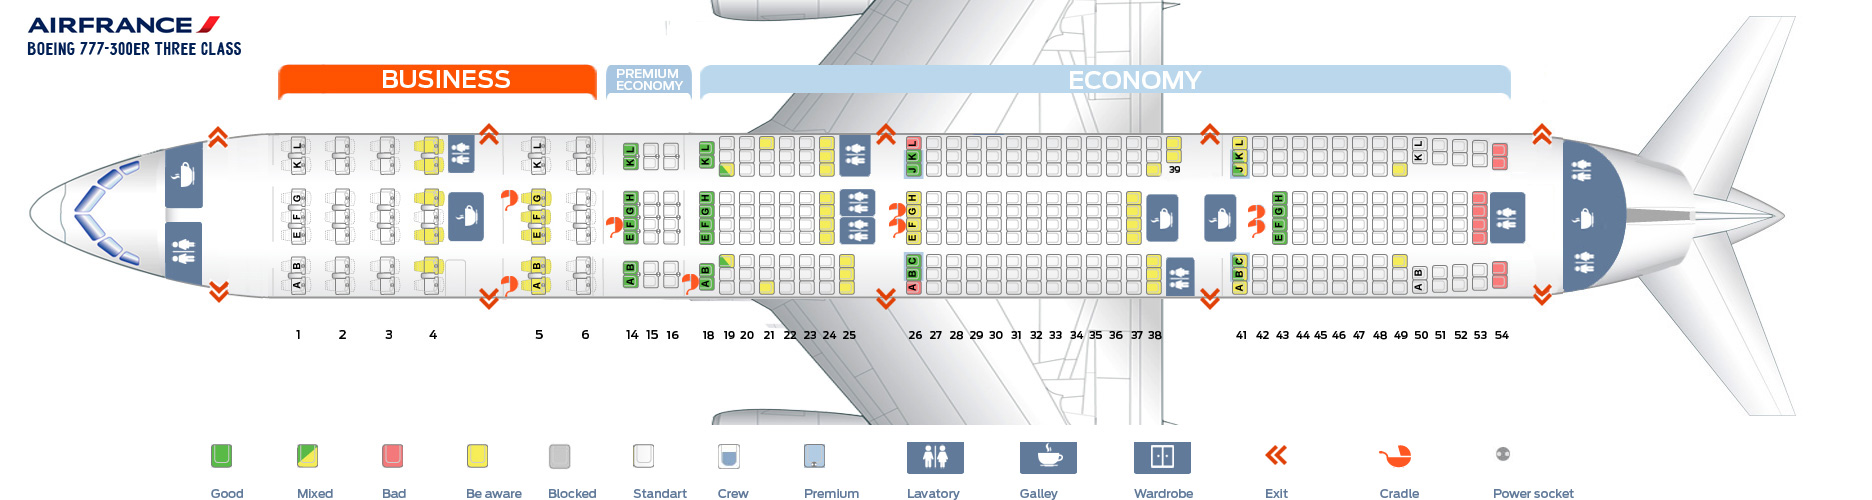 Seat map Boeing 777-300 Air France. Best seats in plane